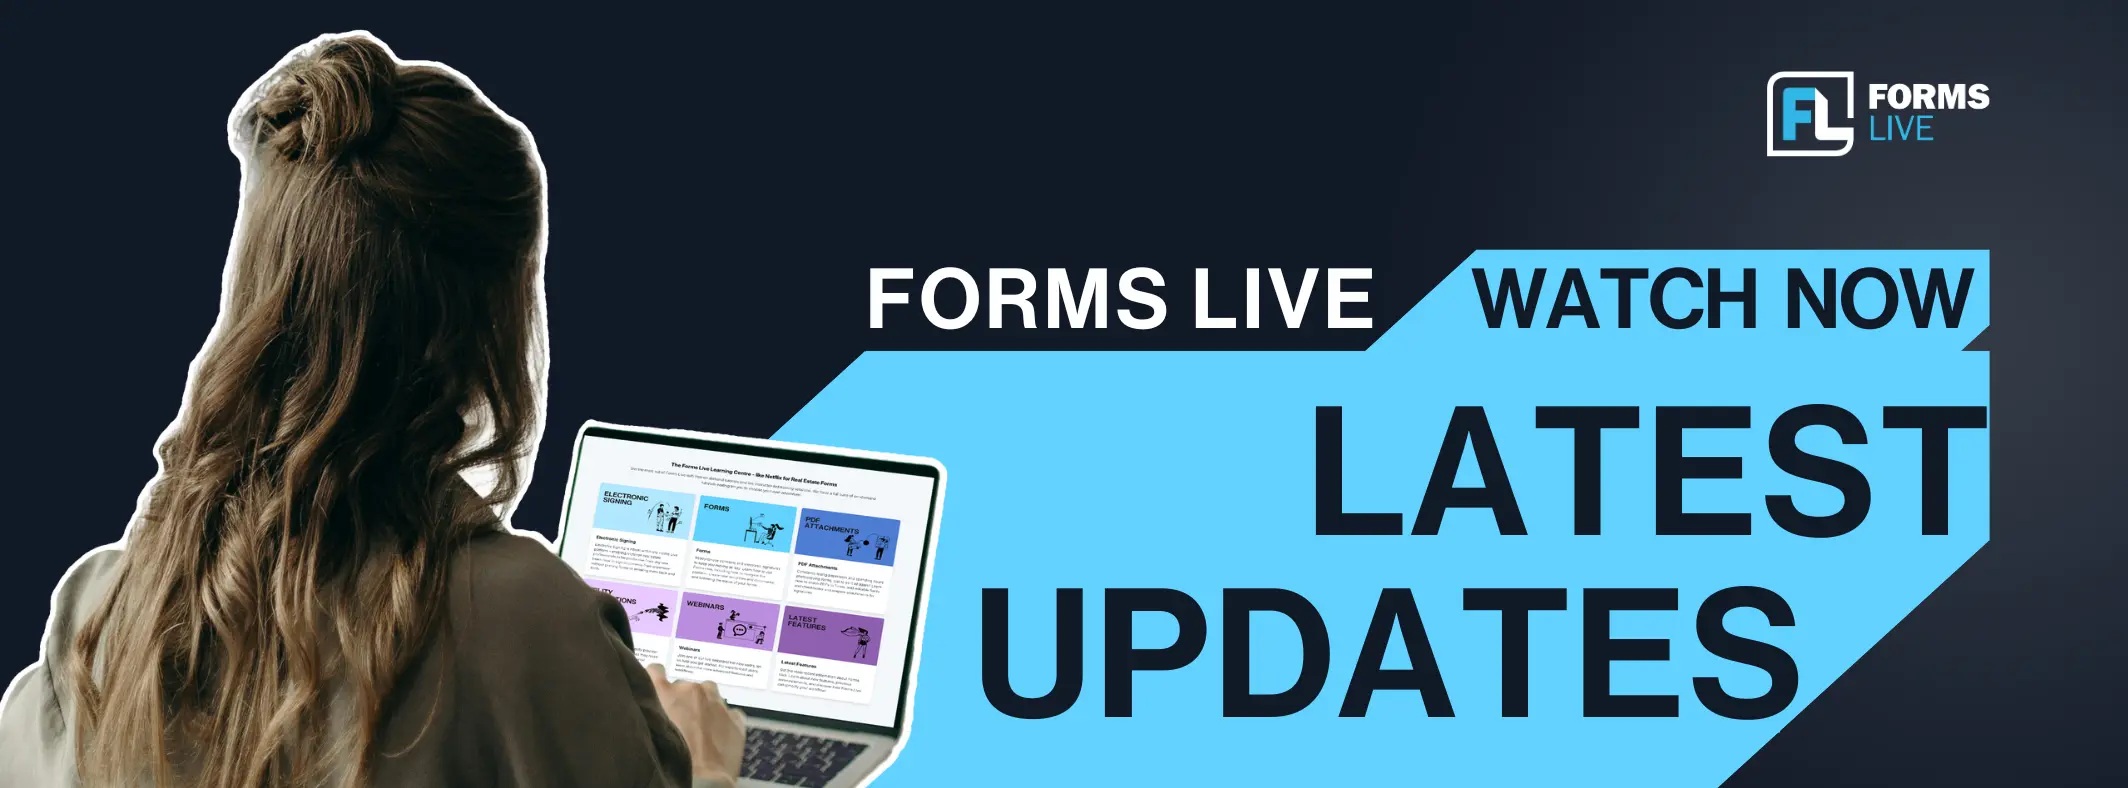 Forms Live Victorian real estate forms dashboard